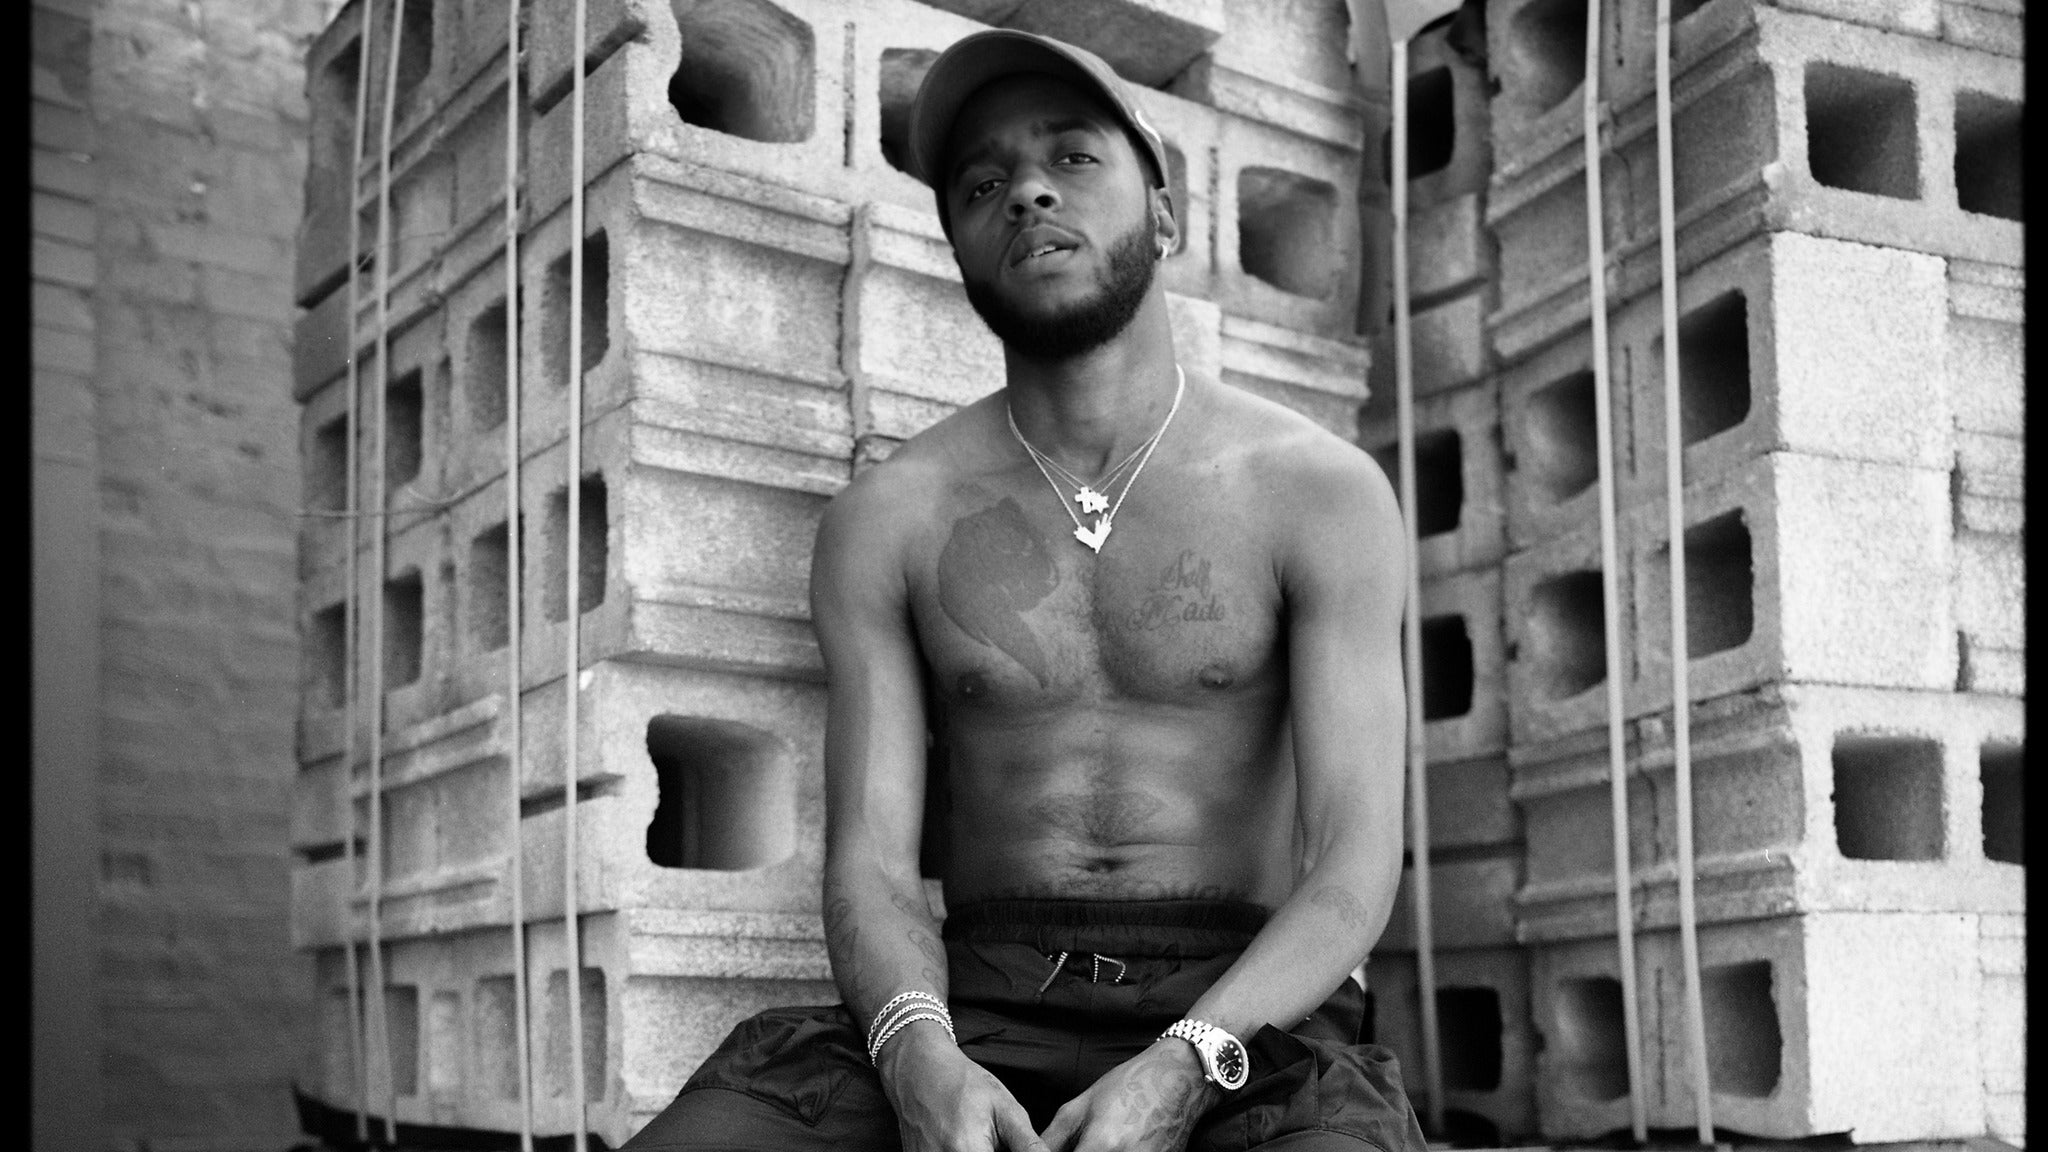 6LACK Presents From East Atlanta with Love Tour in Atlanta promo photo for Live Nation presale offer code